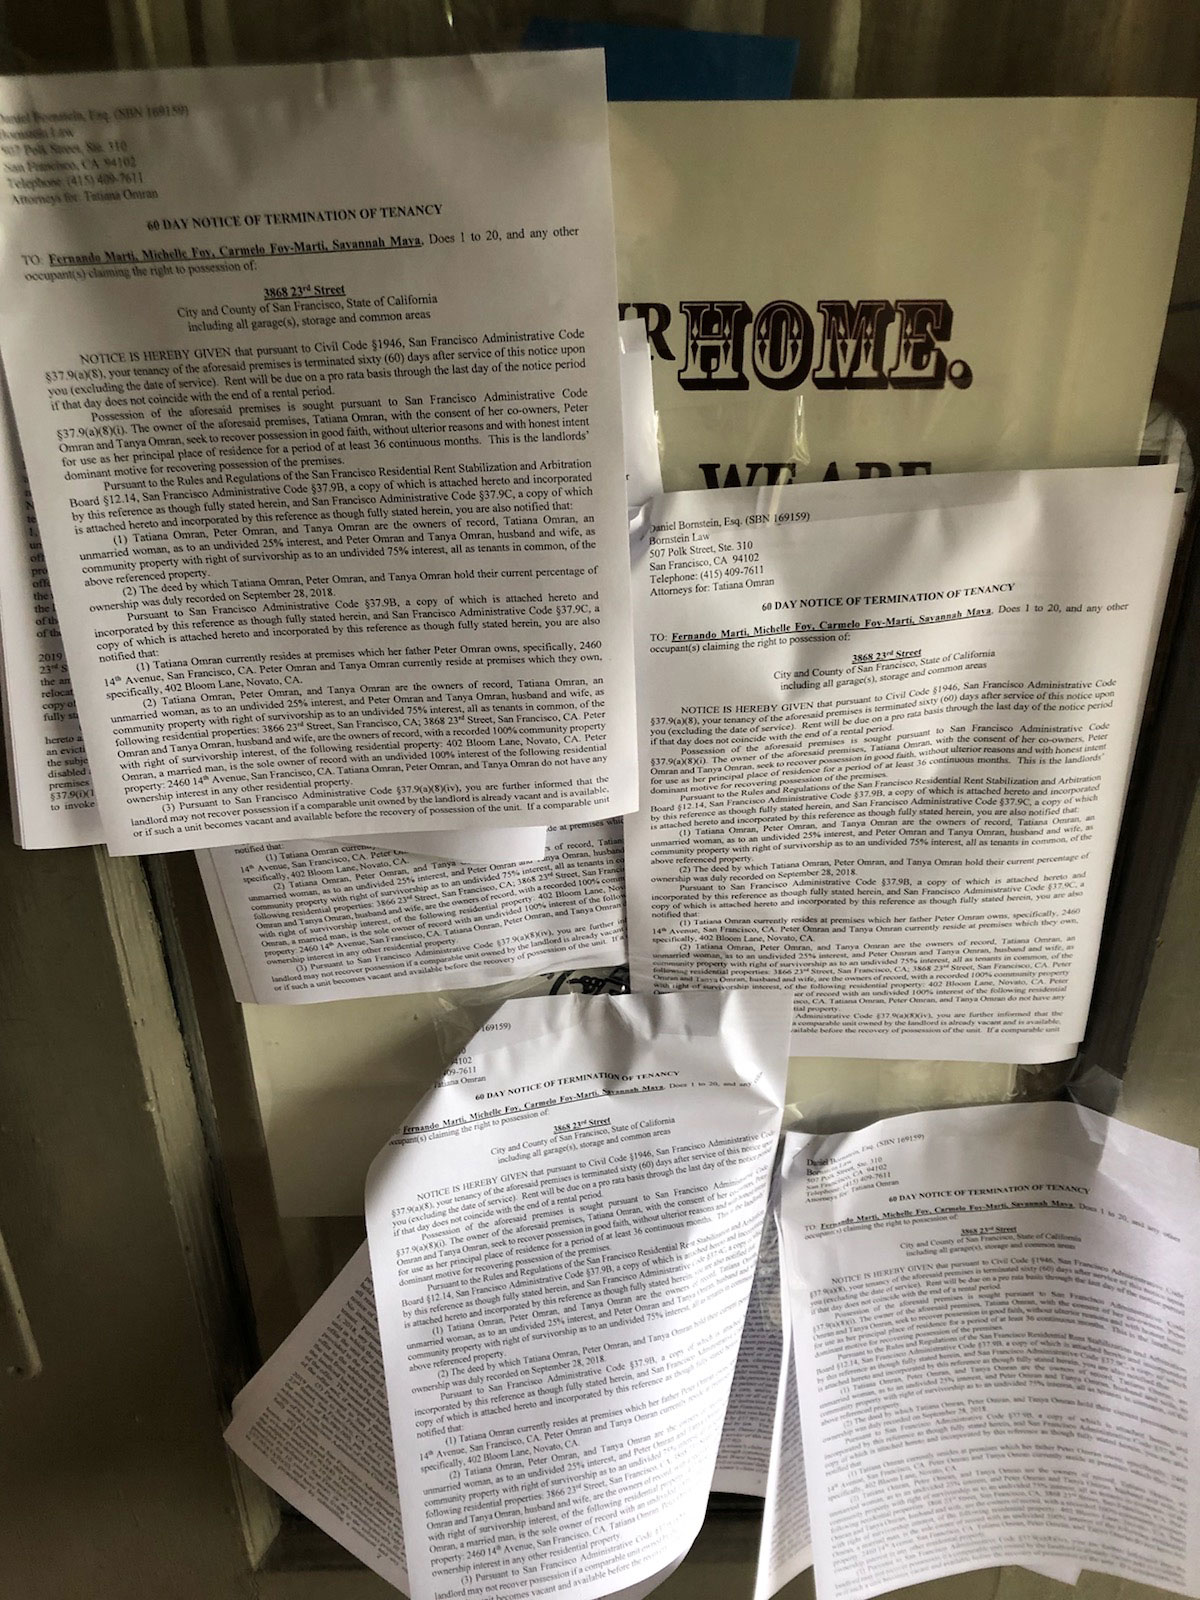 Photograph of eviction notices tapes to front door of Fernando Martí's apartment